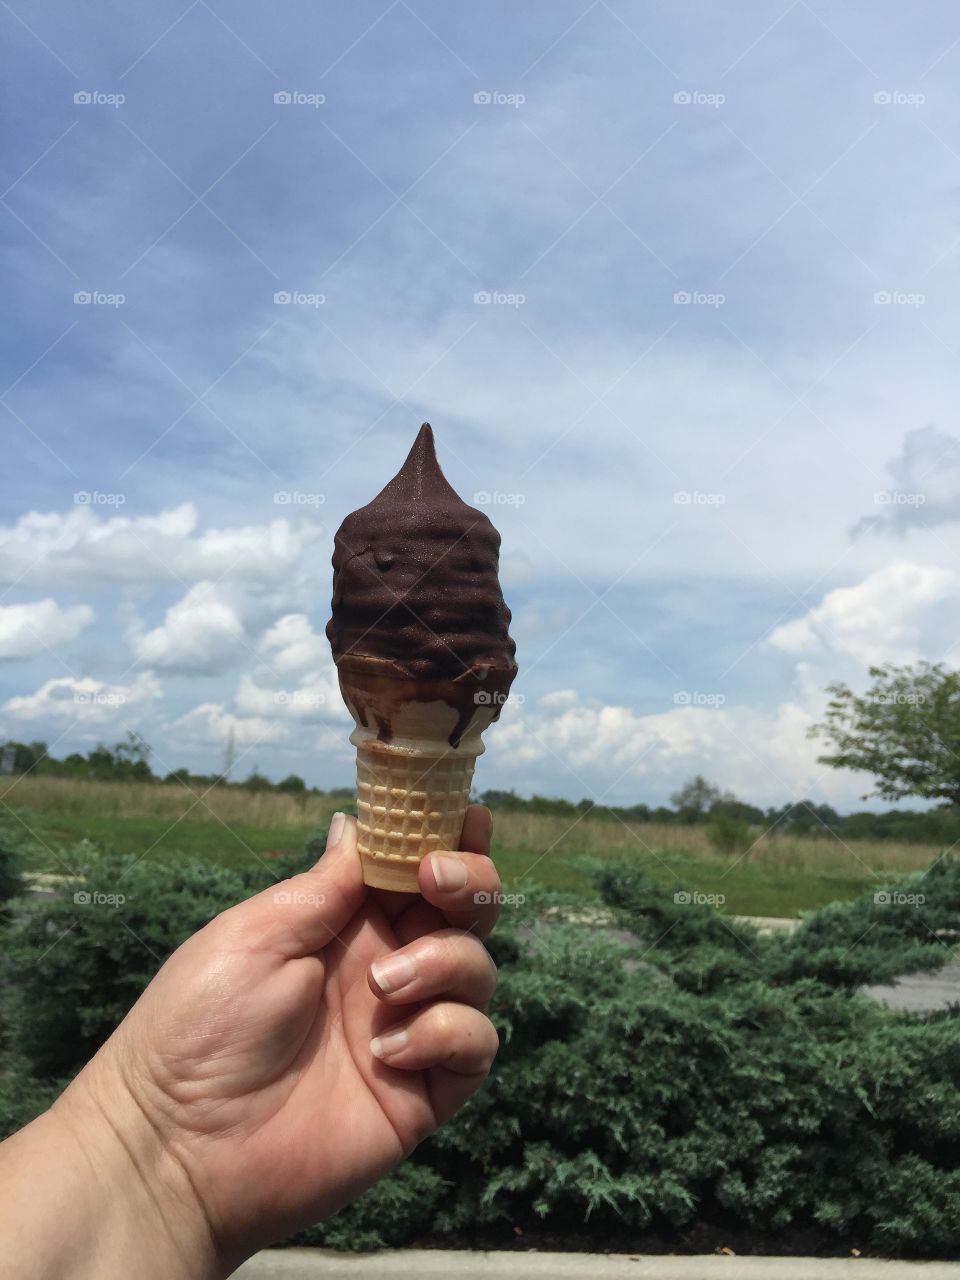 Chocolate Dipped Cone. Enjoying a chocolate dipped ice cream cone on a hot summer day.  Yummy! 